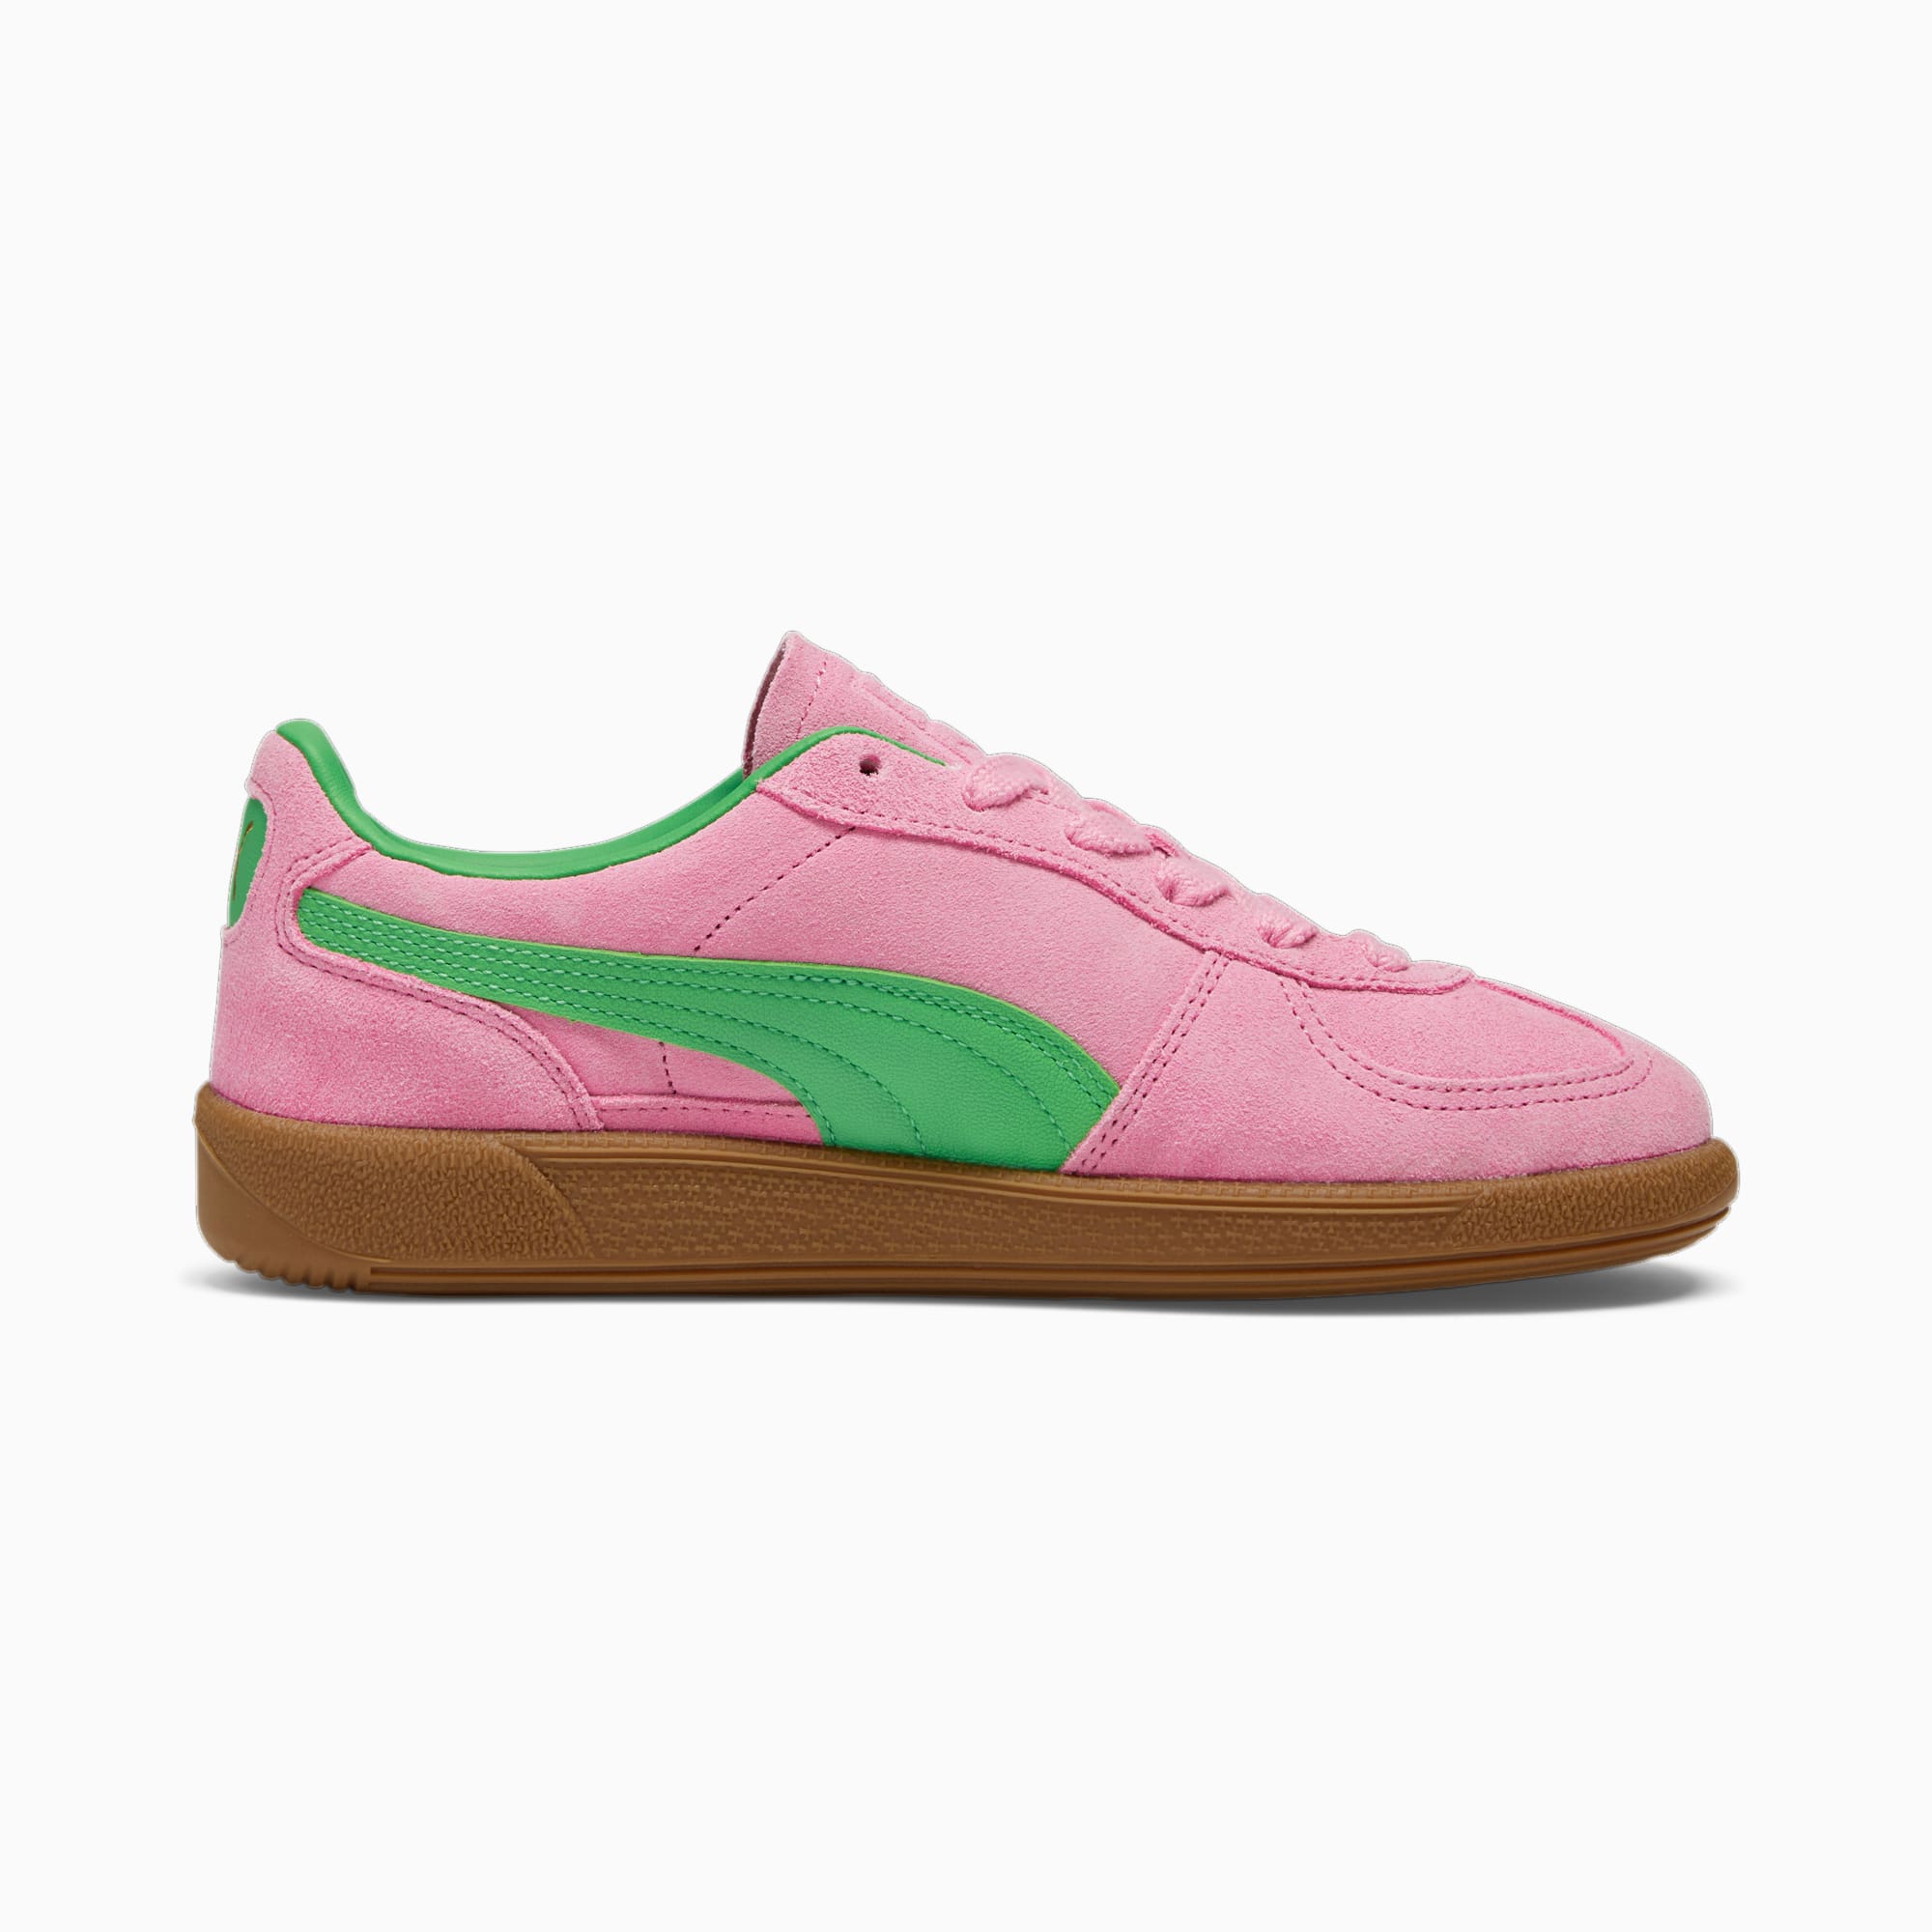 Palermo Special Women's Sneakers | PUMA